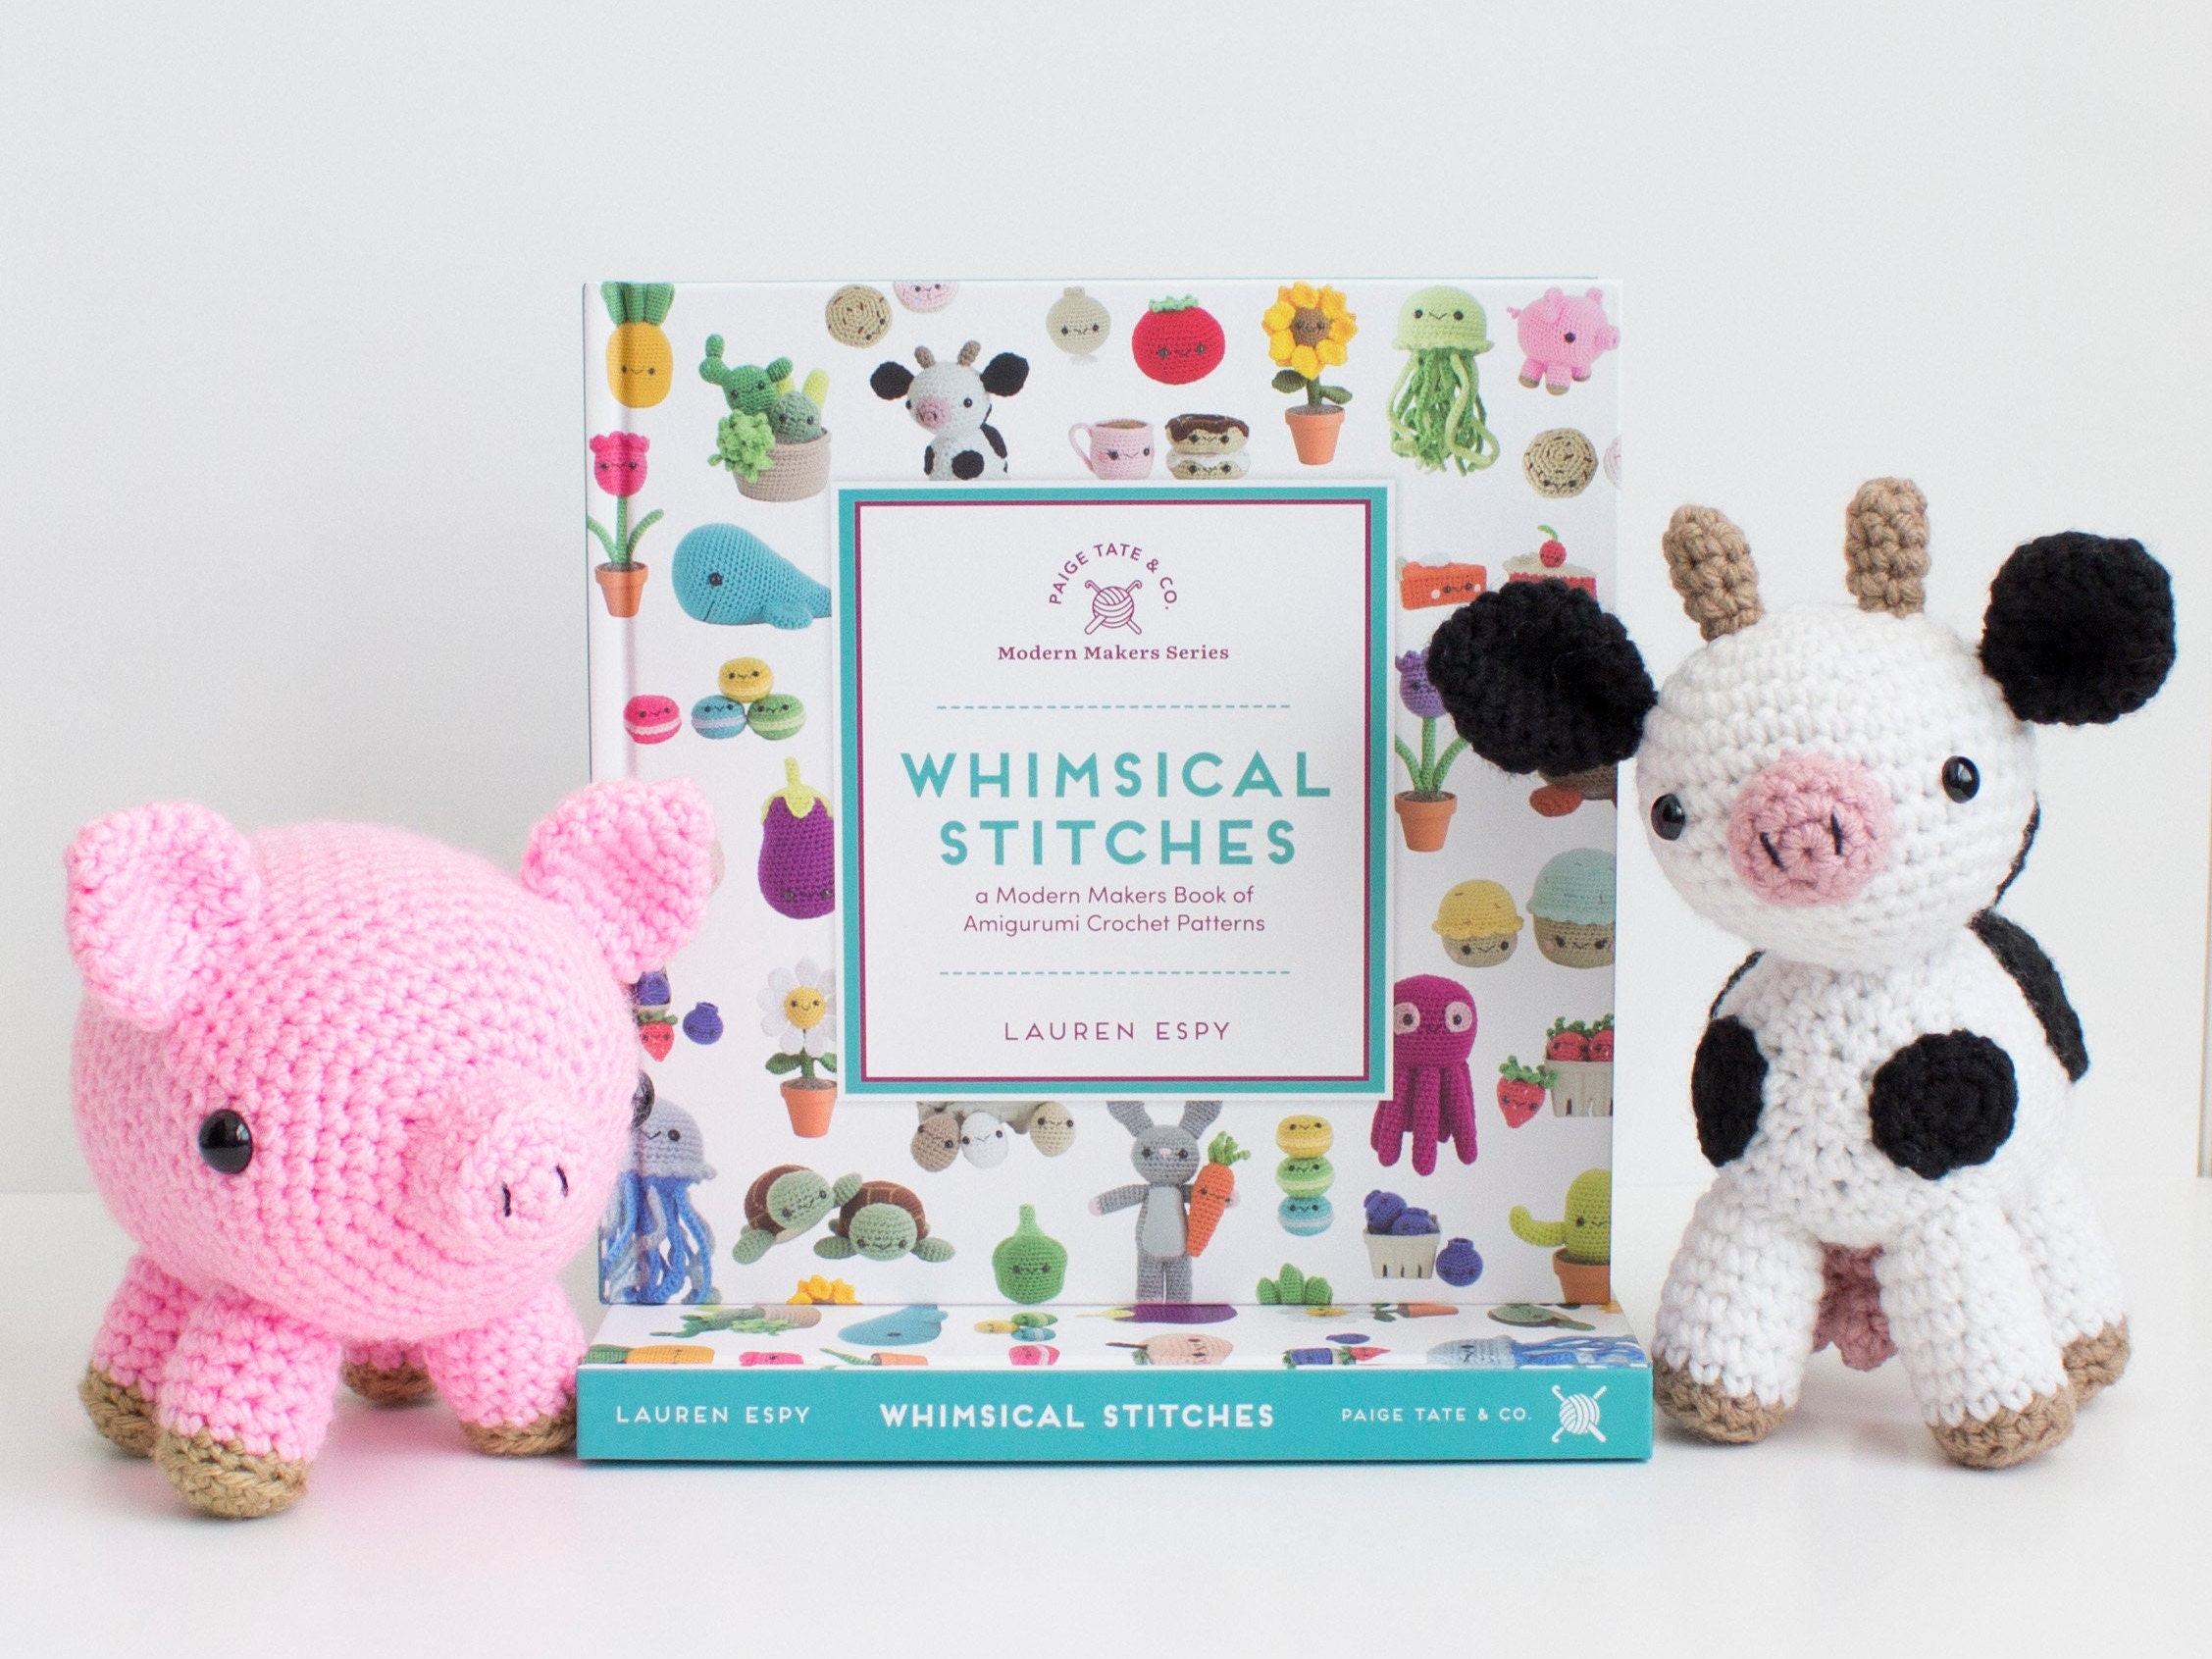  Whimsical Stitches: A Modern Makers Book of Amigurumi Crochet  Patterns: 9781944515638: Espy, Lauren, Paige Tate & Co.: Arts, Crafts &  Sewing